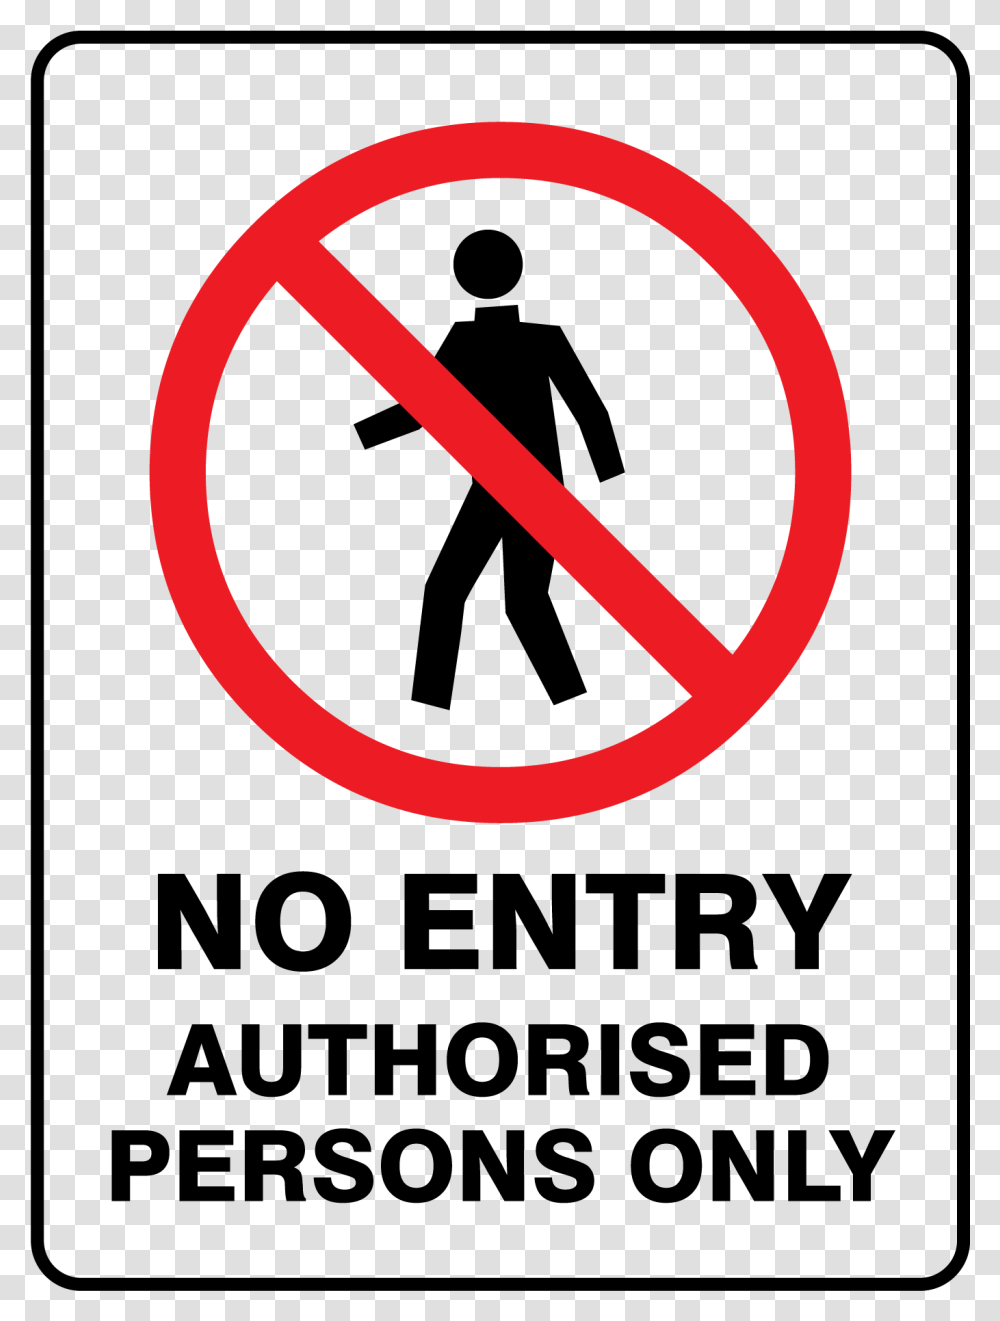 No Entry Authorised Persons Only Authorized Person, Sign, Road Sign, Stopsign Transparent Png